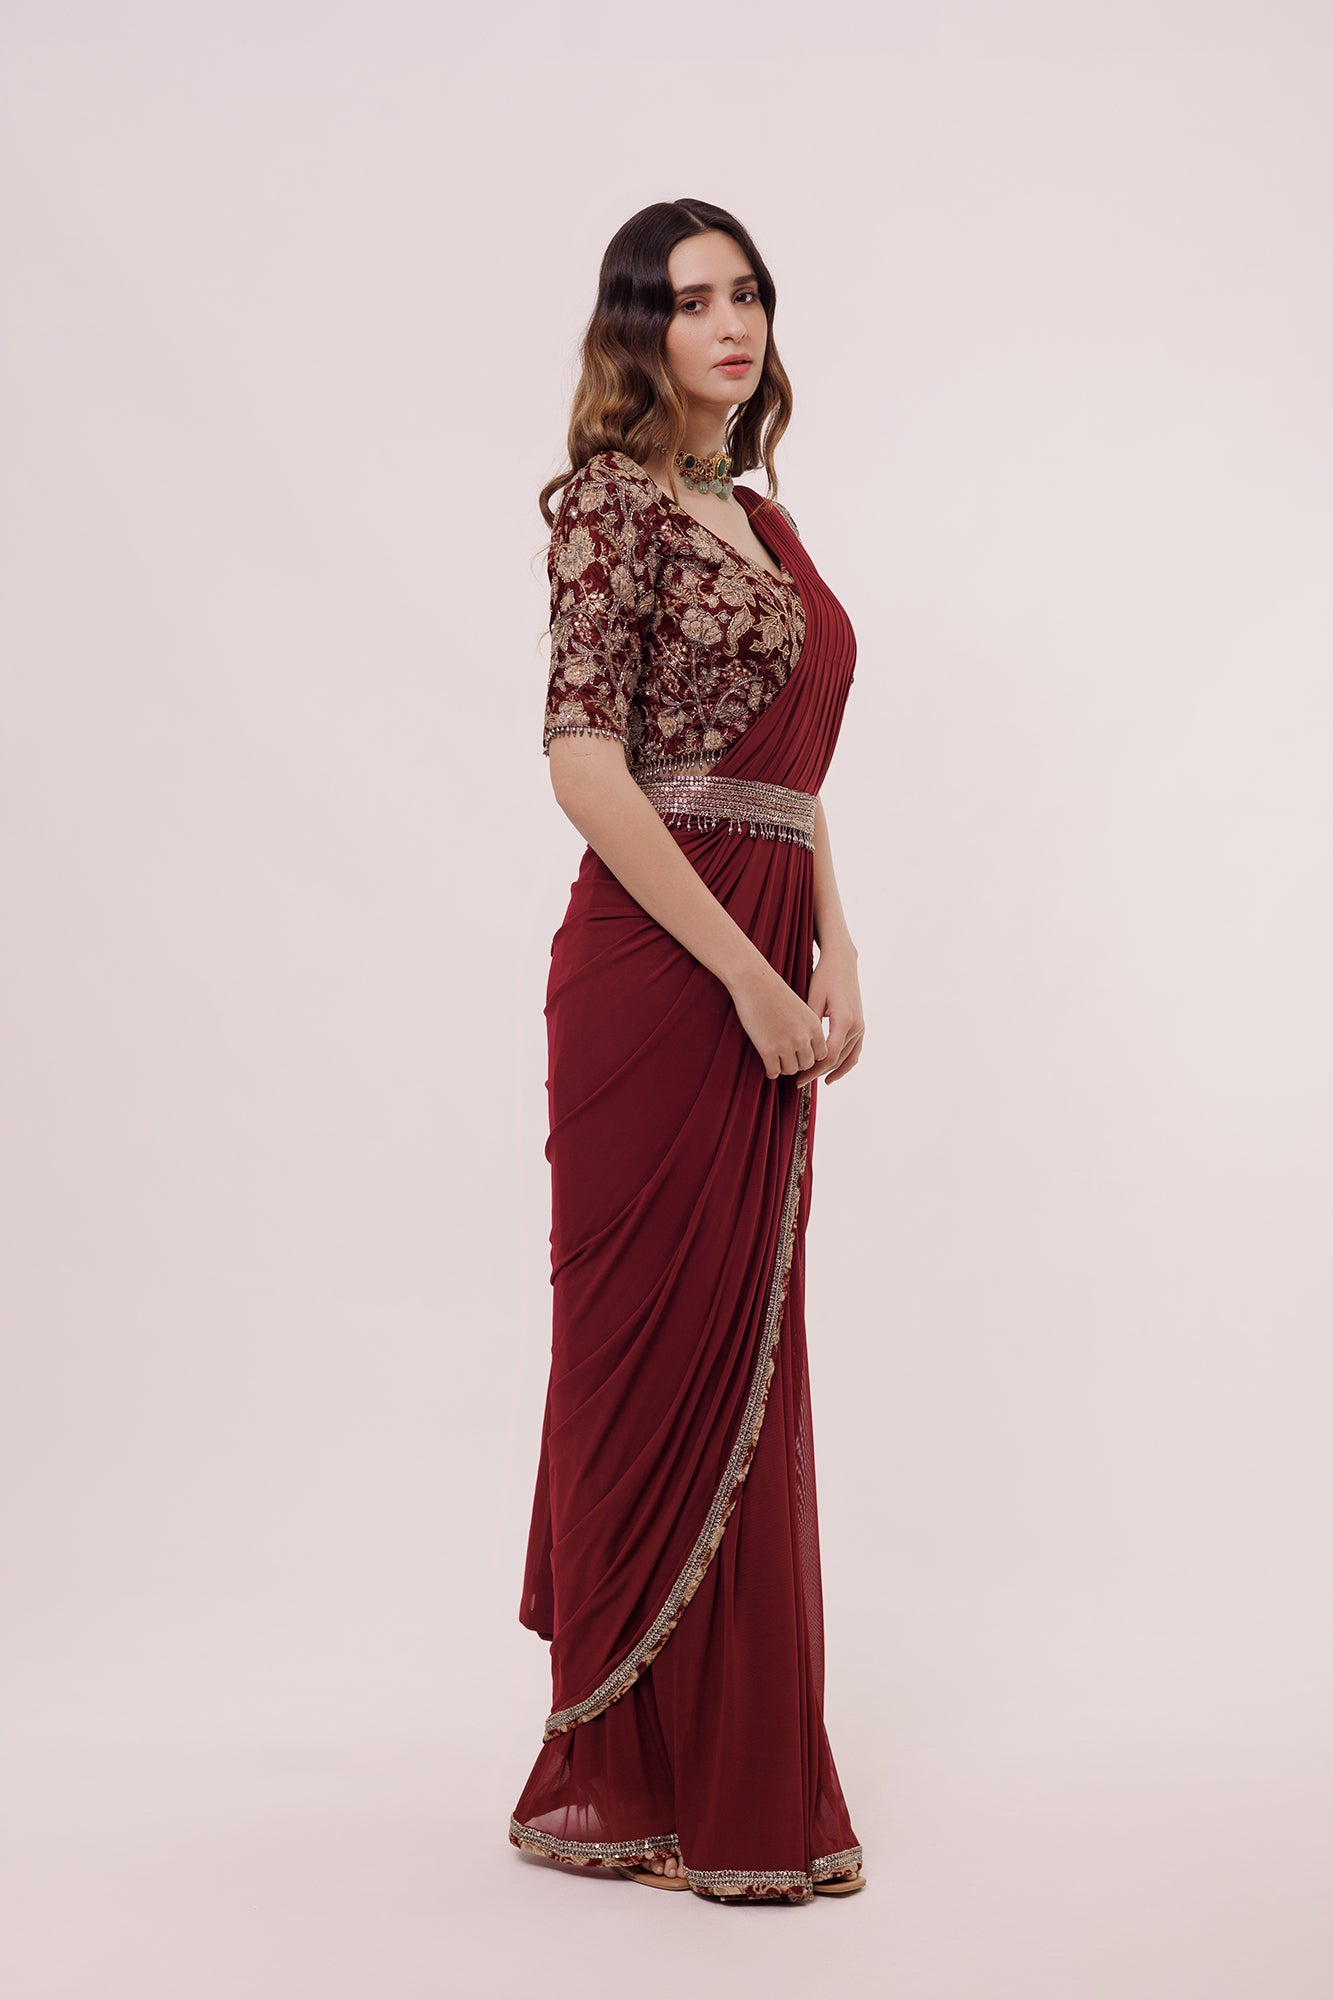 Shop wine net saree with embroidered edges and a narrow belt. Make a fashion statement on festive occasions and weddings with designer sarees, designer suits, Indian dresses, Anarkali suits, palazzo suits, designer gowns, sharara suits, and embroidered sarees from Pure Elegance Indian fashion store in the USA.